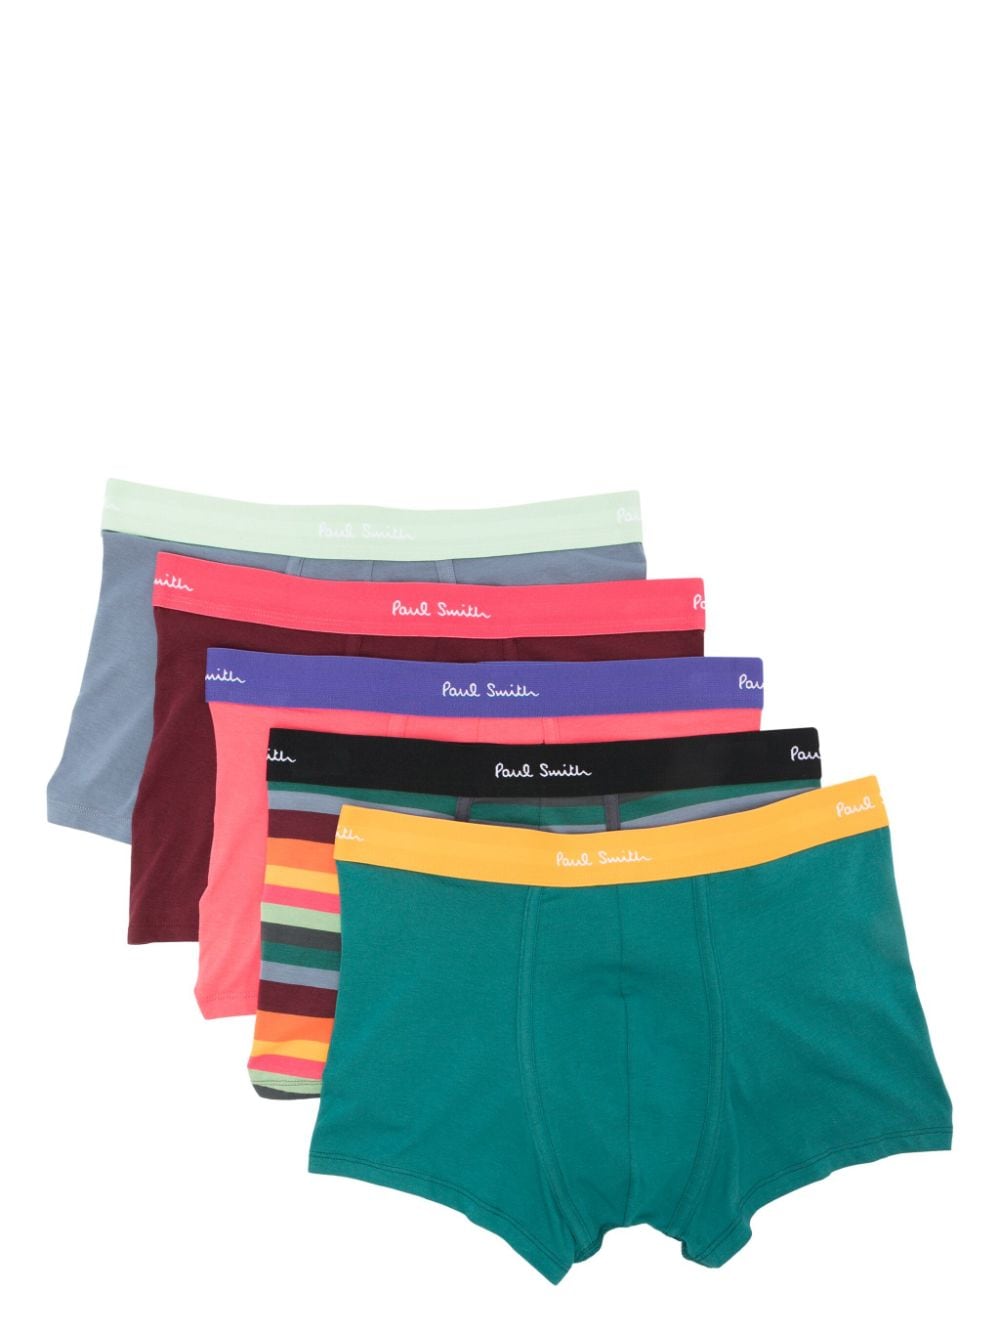 Paul Smith logo-elasticated waistband boxers (pack of five) - Green von Paul Smith